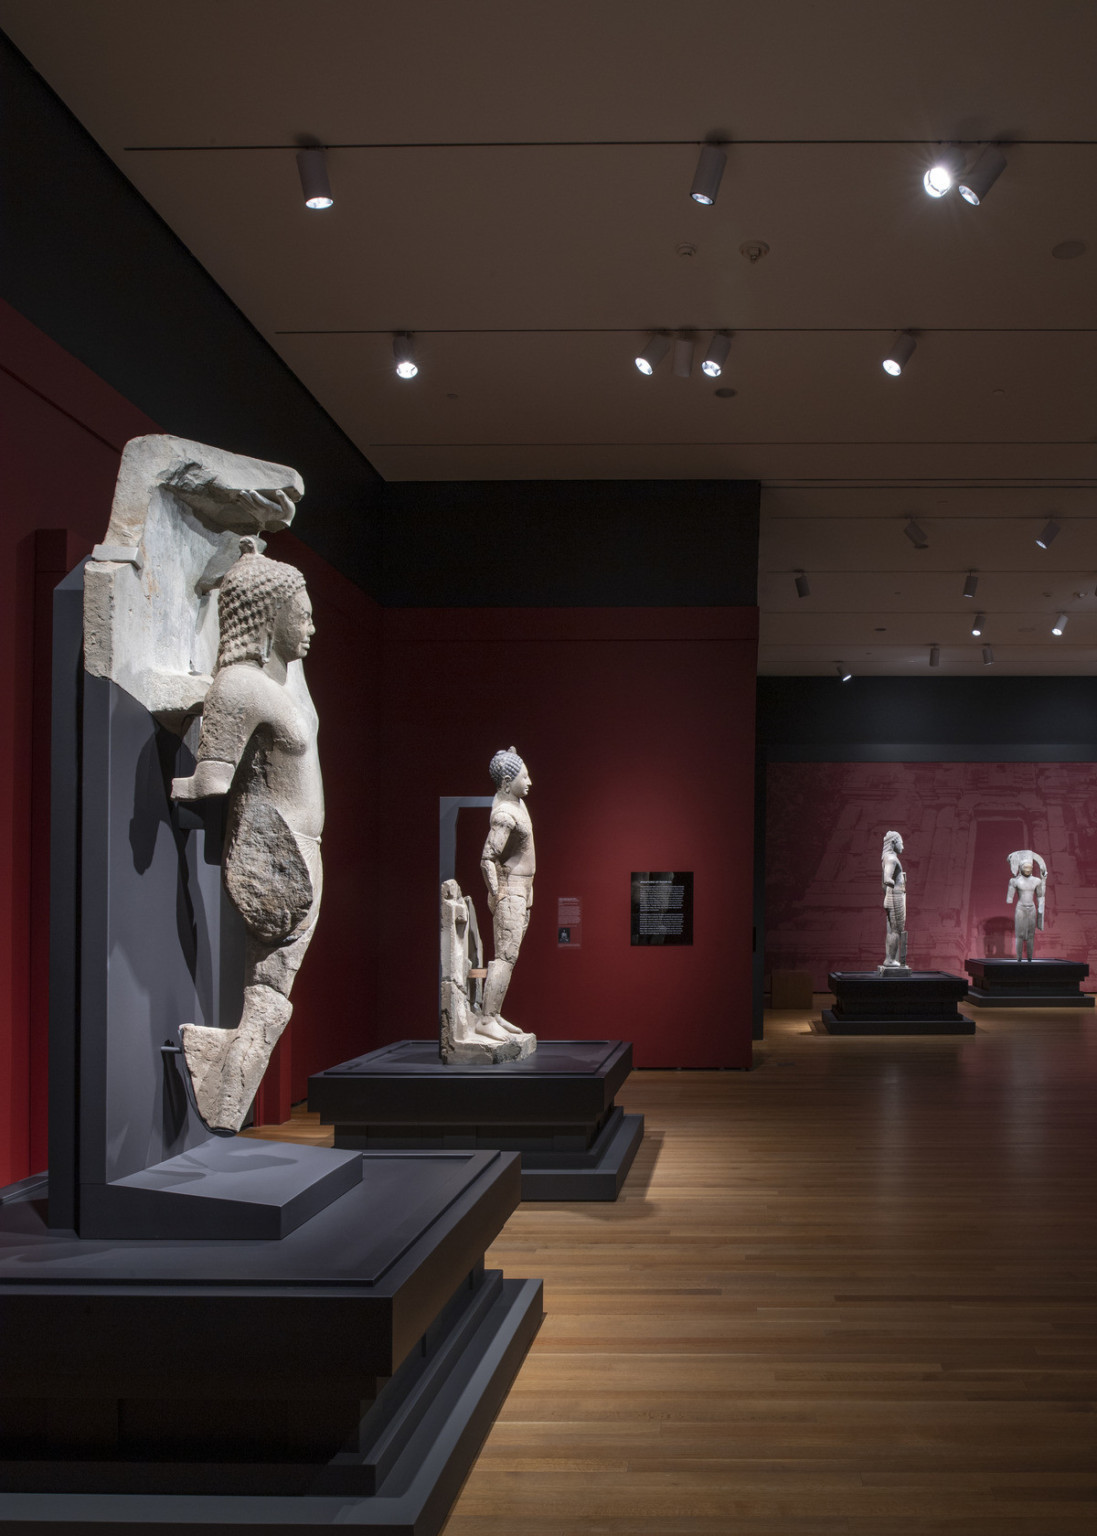 white sculpture remnants mounted on black supports on black plinths in a gallery room with maroon walls and wood floors